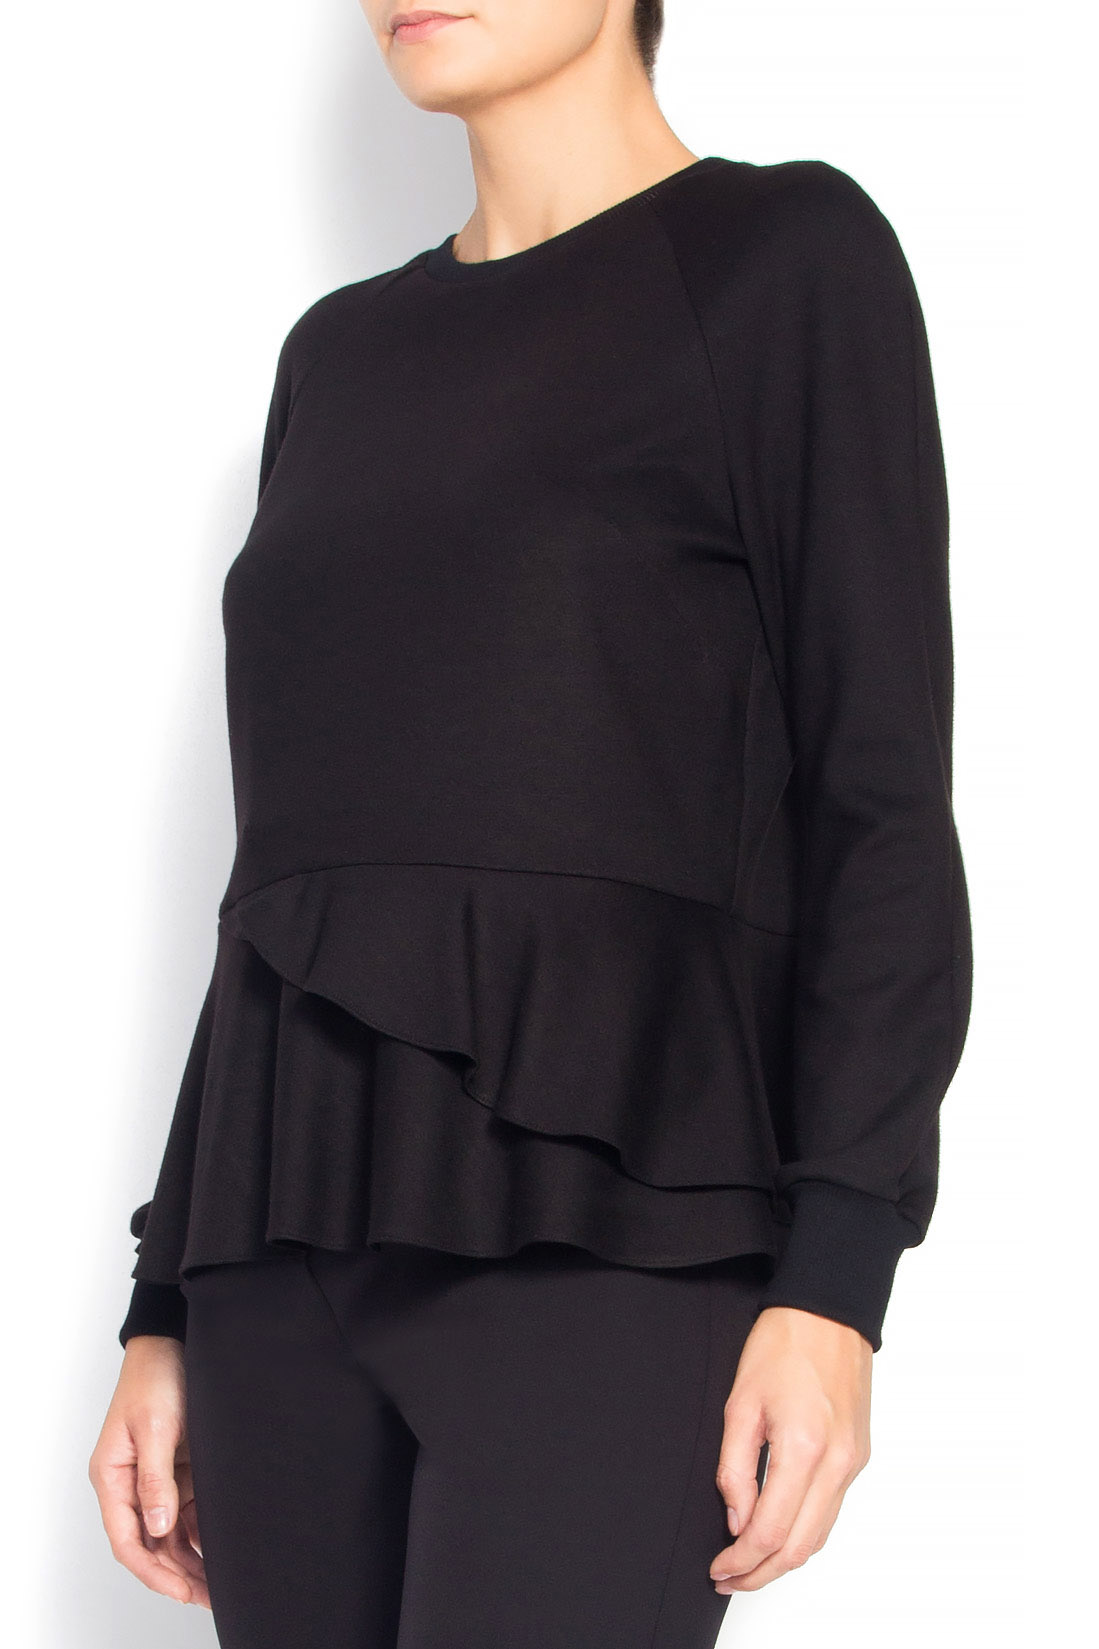 Crepe frill top Poelle image 1